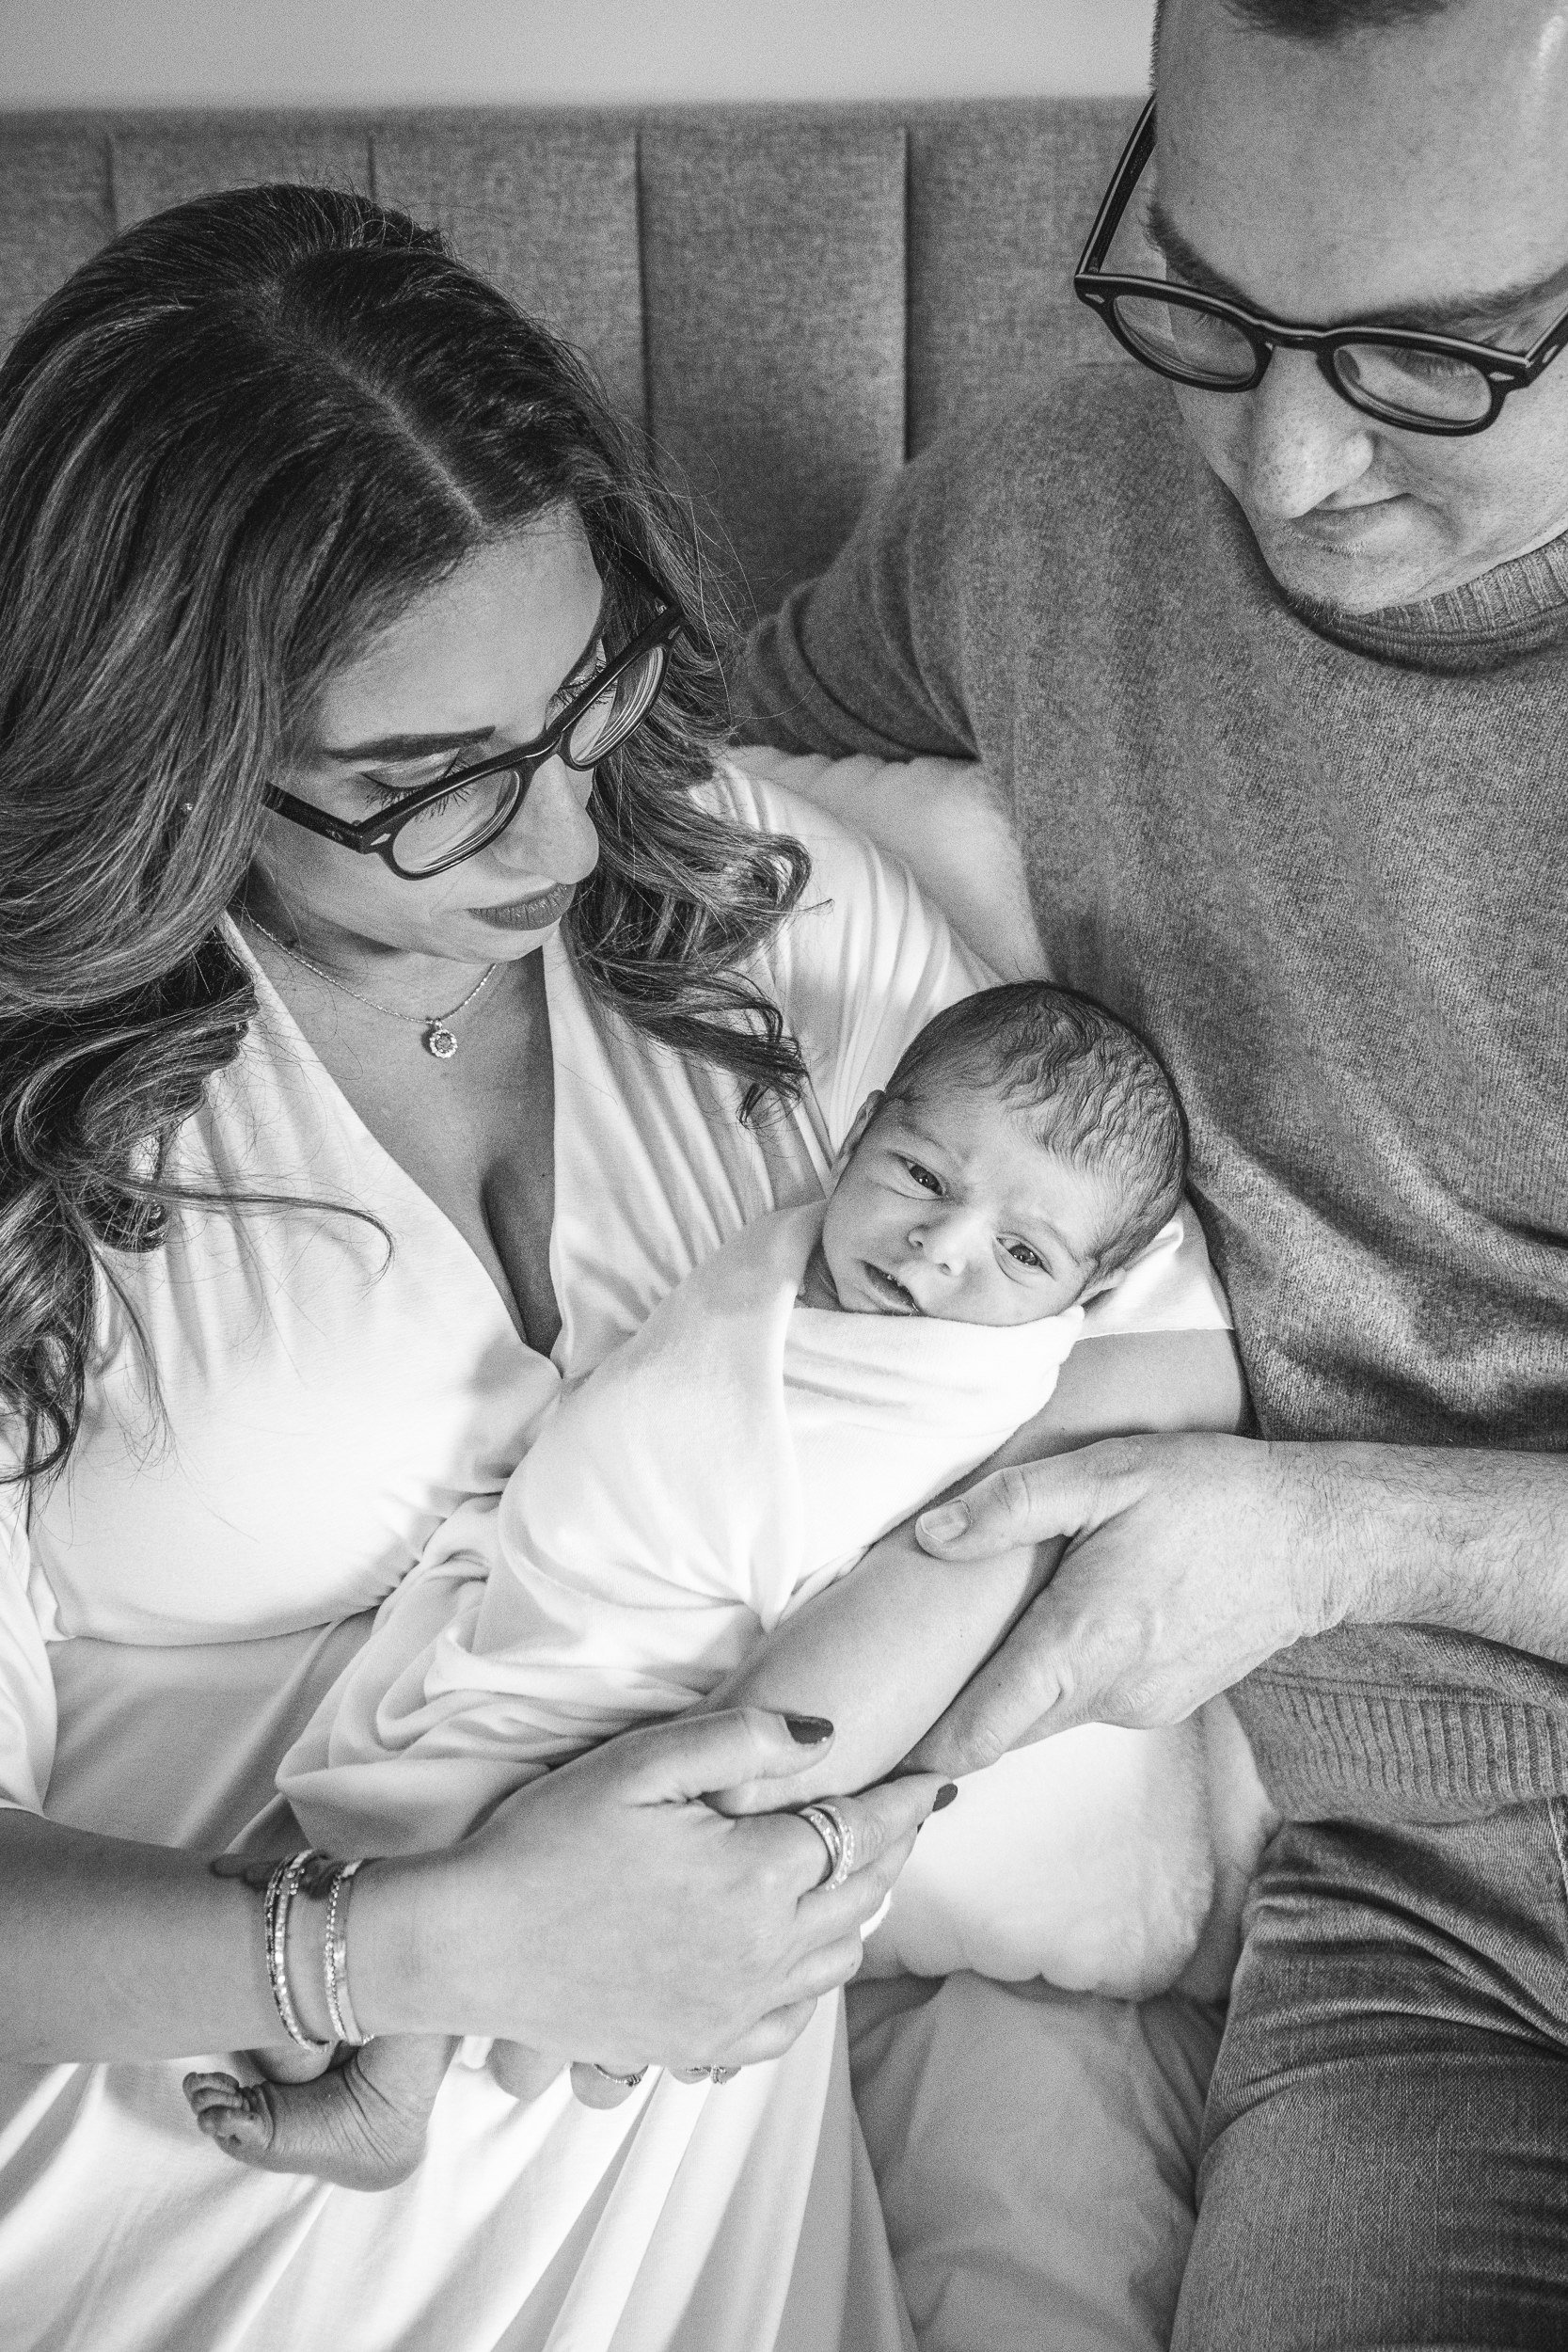  Family of three with a baby in the center captured by Nicole Hawkins Photography a professional family photographer. NJ family #NicoleHawkinsPhotography #NicoleHawkinsFamily #Newborns #InHomeNewborns #NicoleHawkinsNewborns #NJnewborns #babygirl 